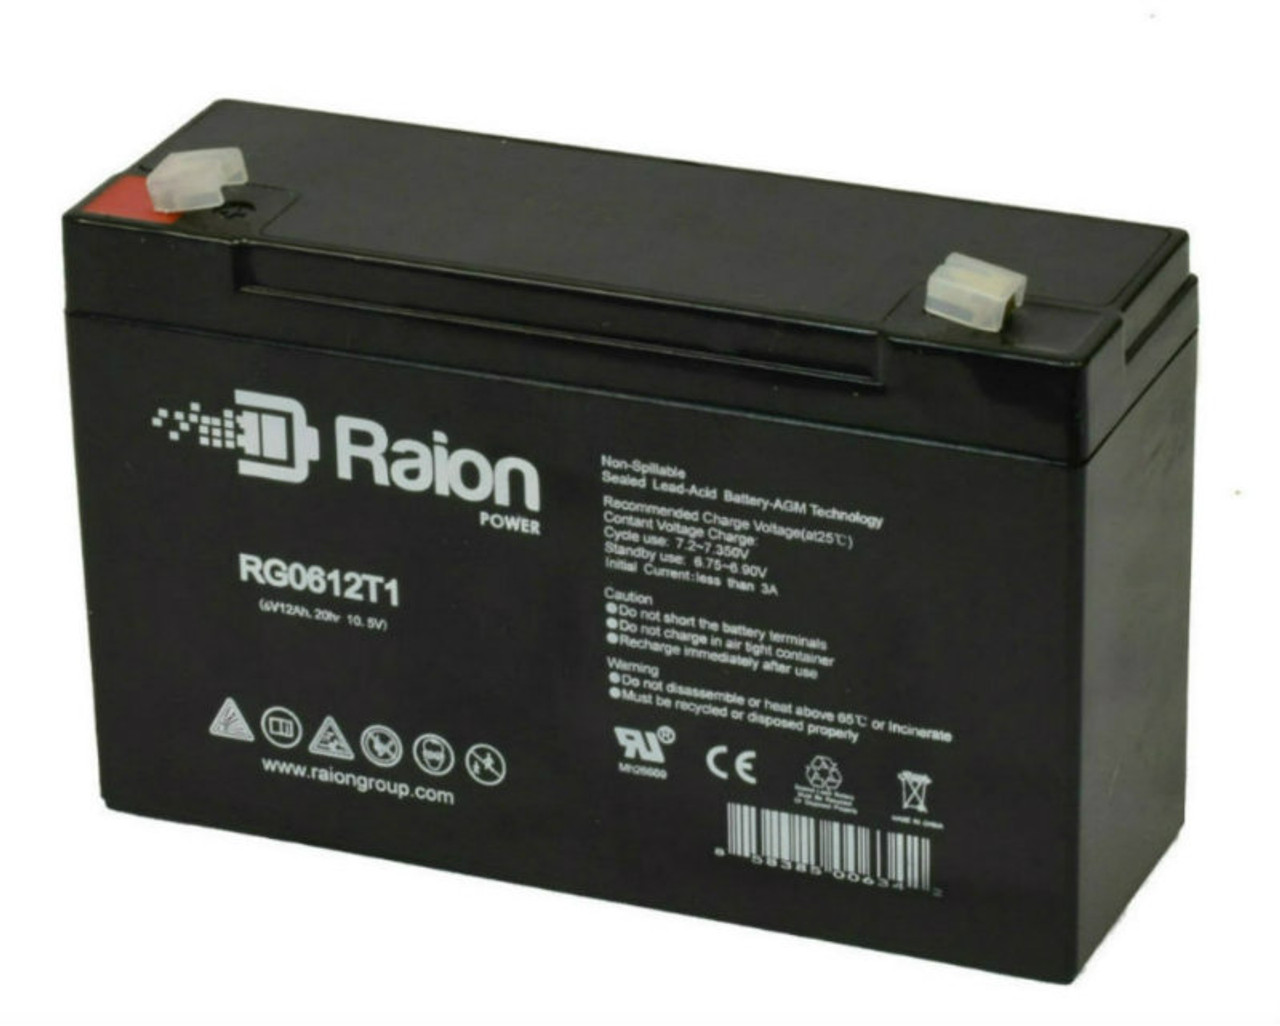 Raion Power RG06120T1 Replacement Battery for Dongjin DJ6-10